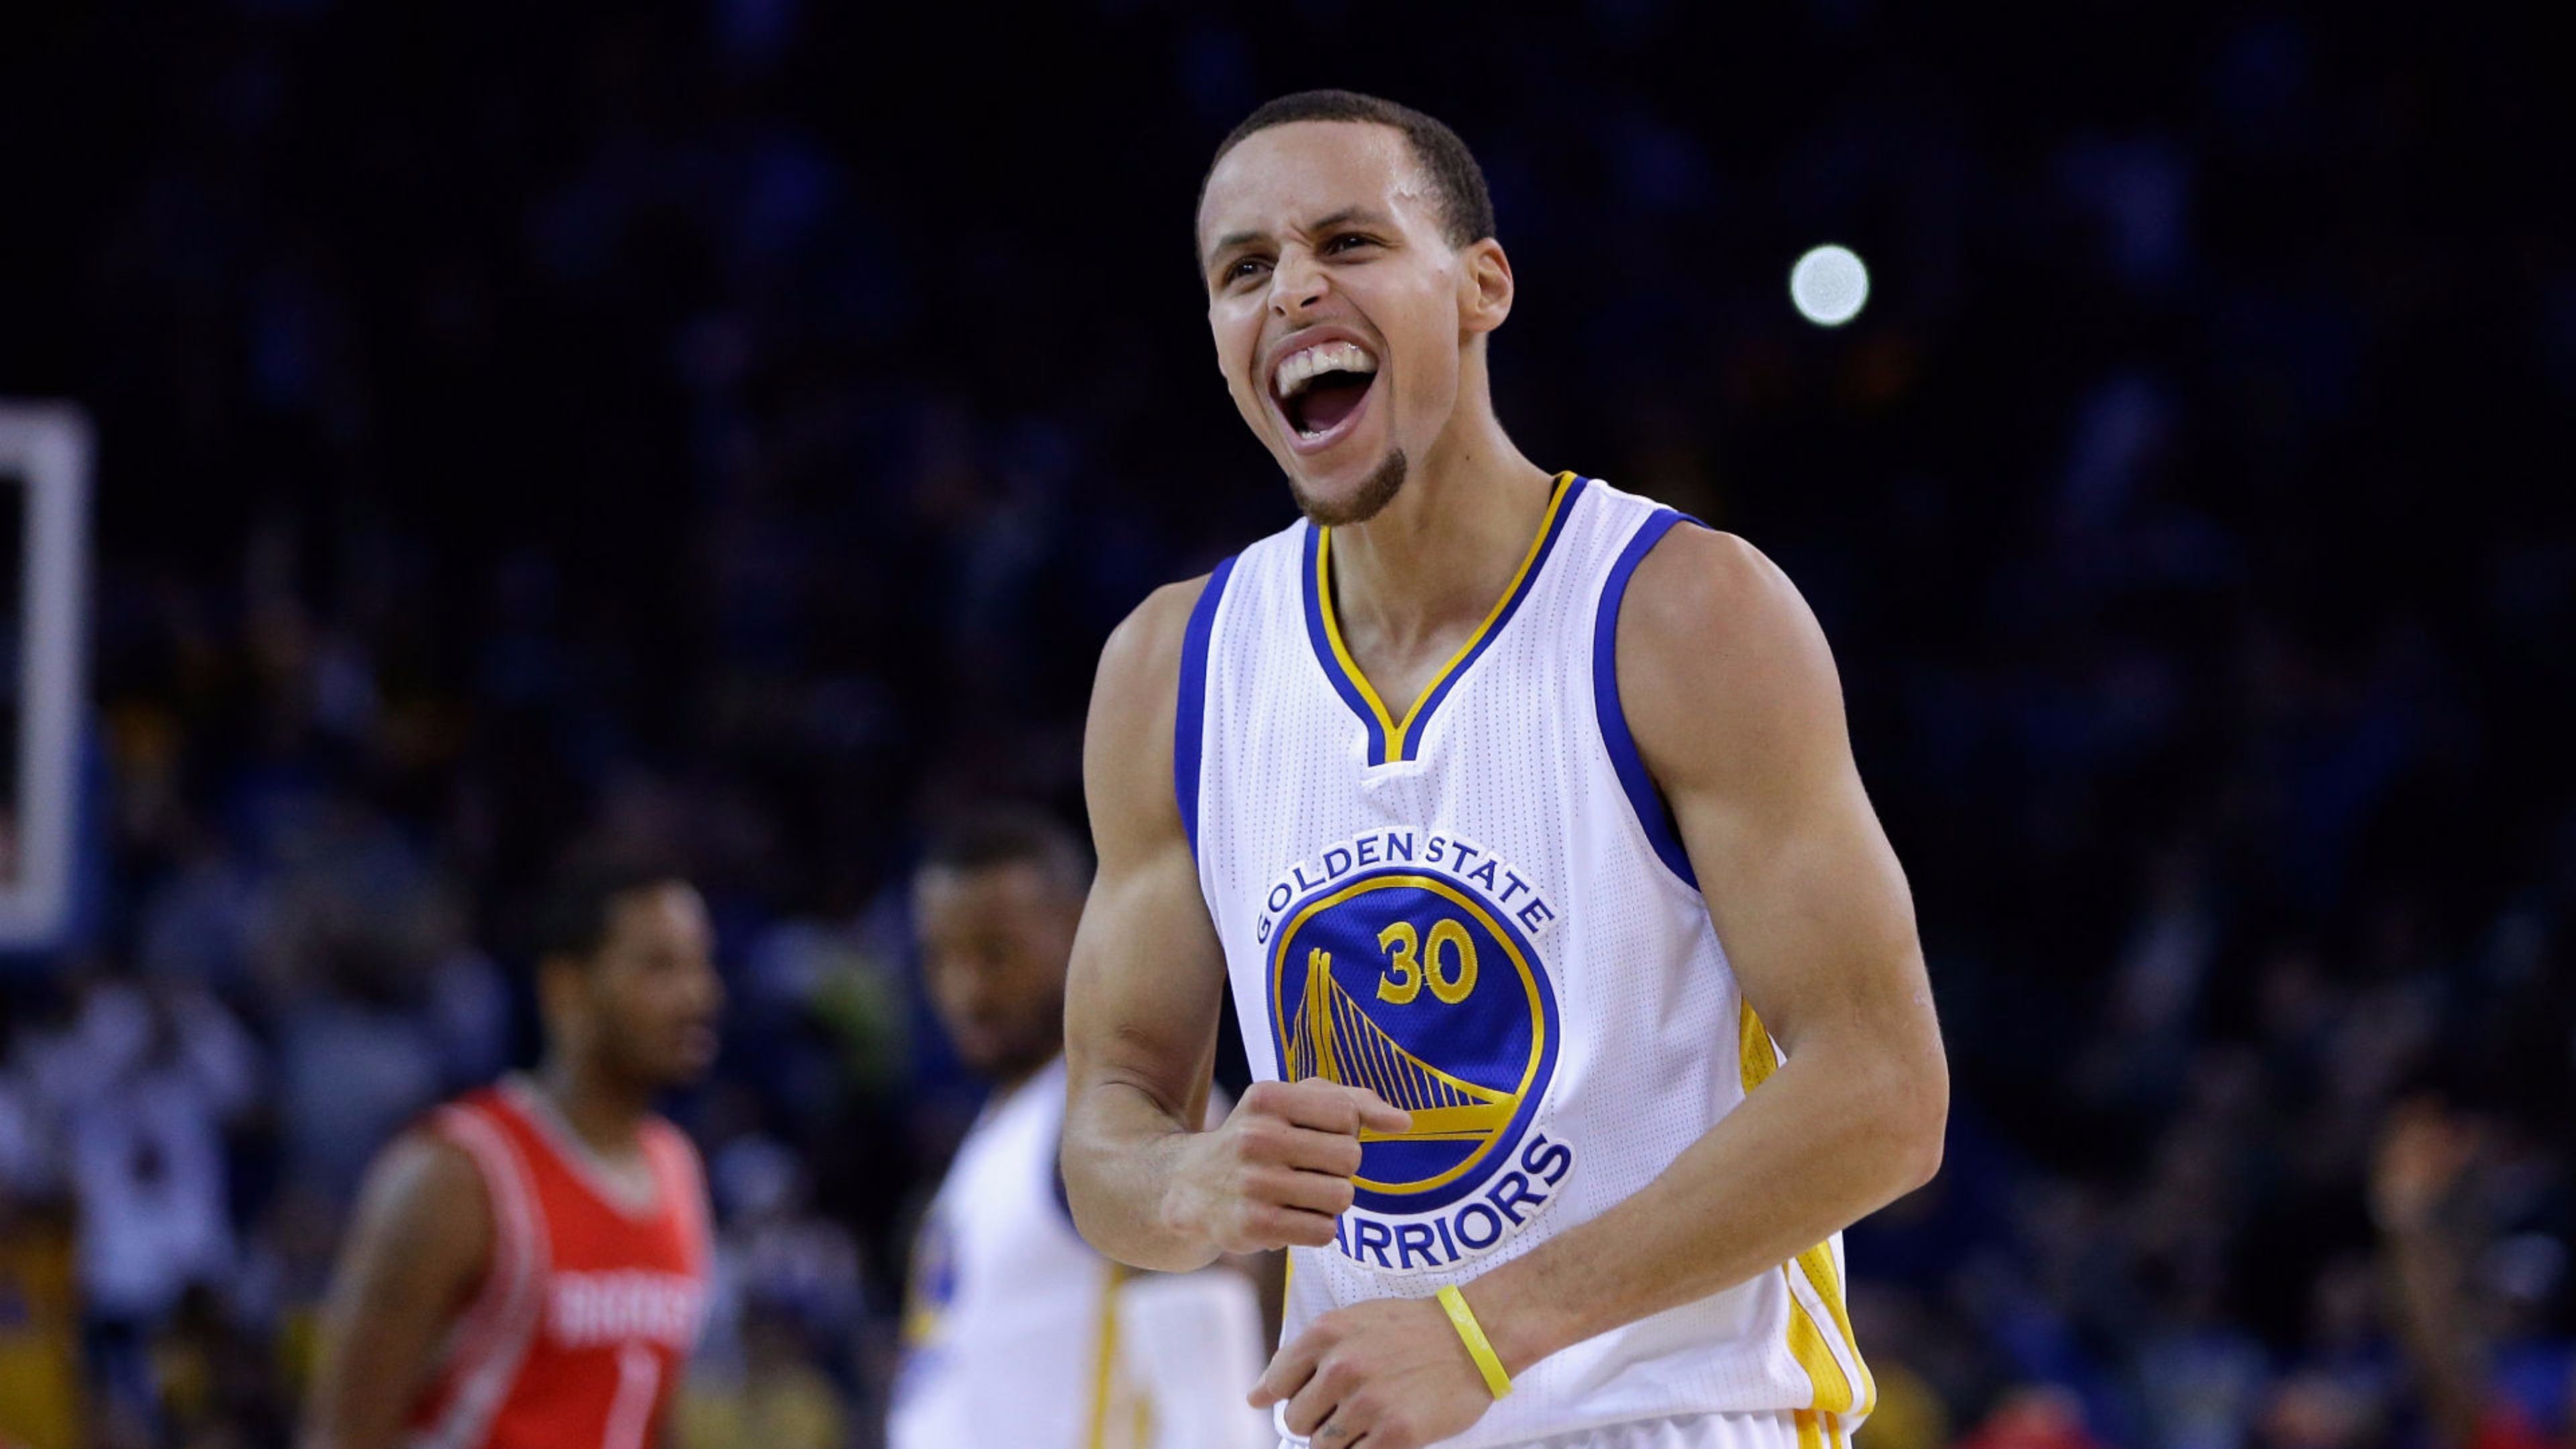 steph curry live wallpapers,sports,basketball player,team sport,ball game,basketball moves